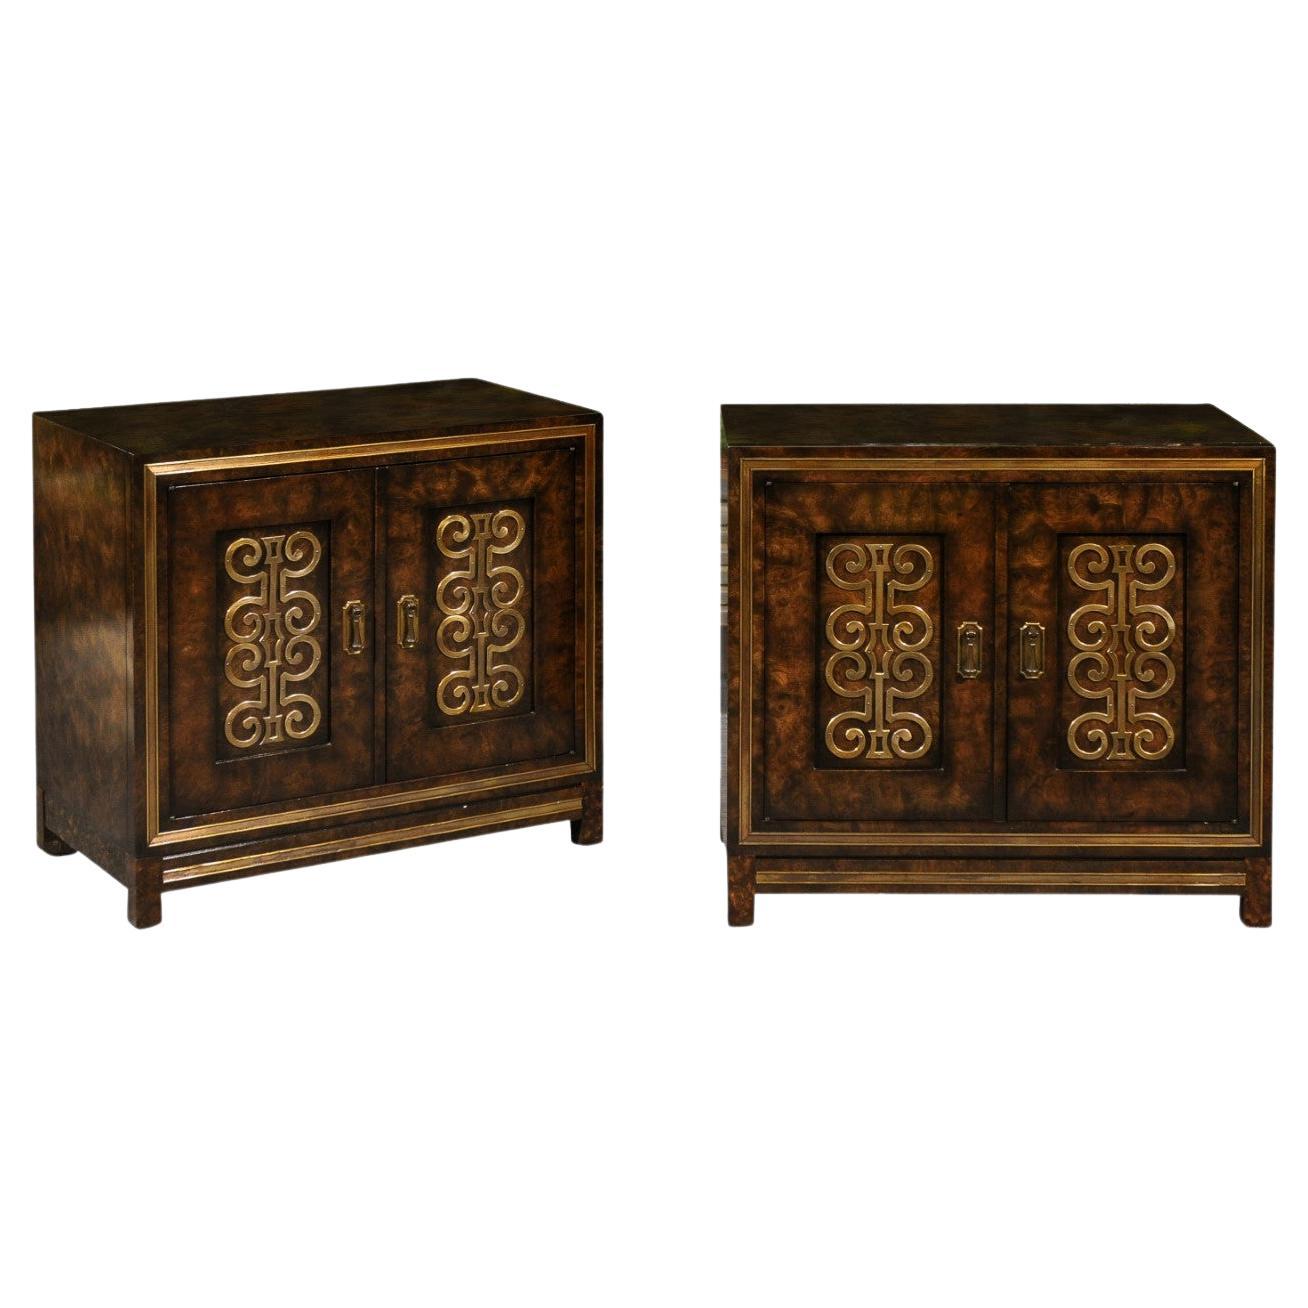 Mesmerizing Pair of Lacquer and Brass Cabinets by William Doezema, circa 1970 For Sale